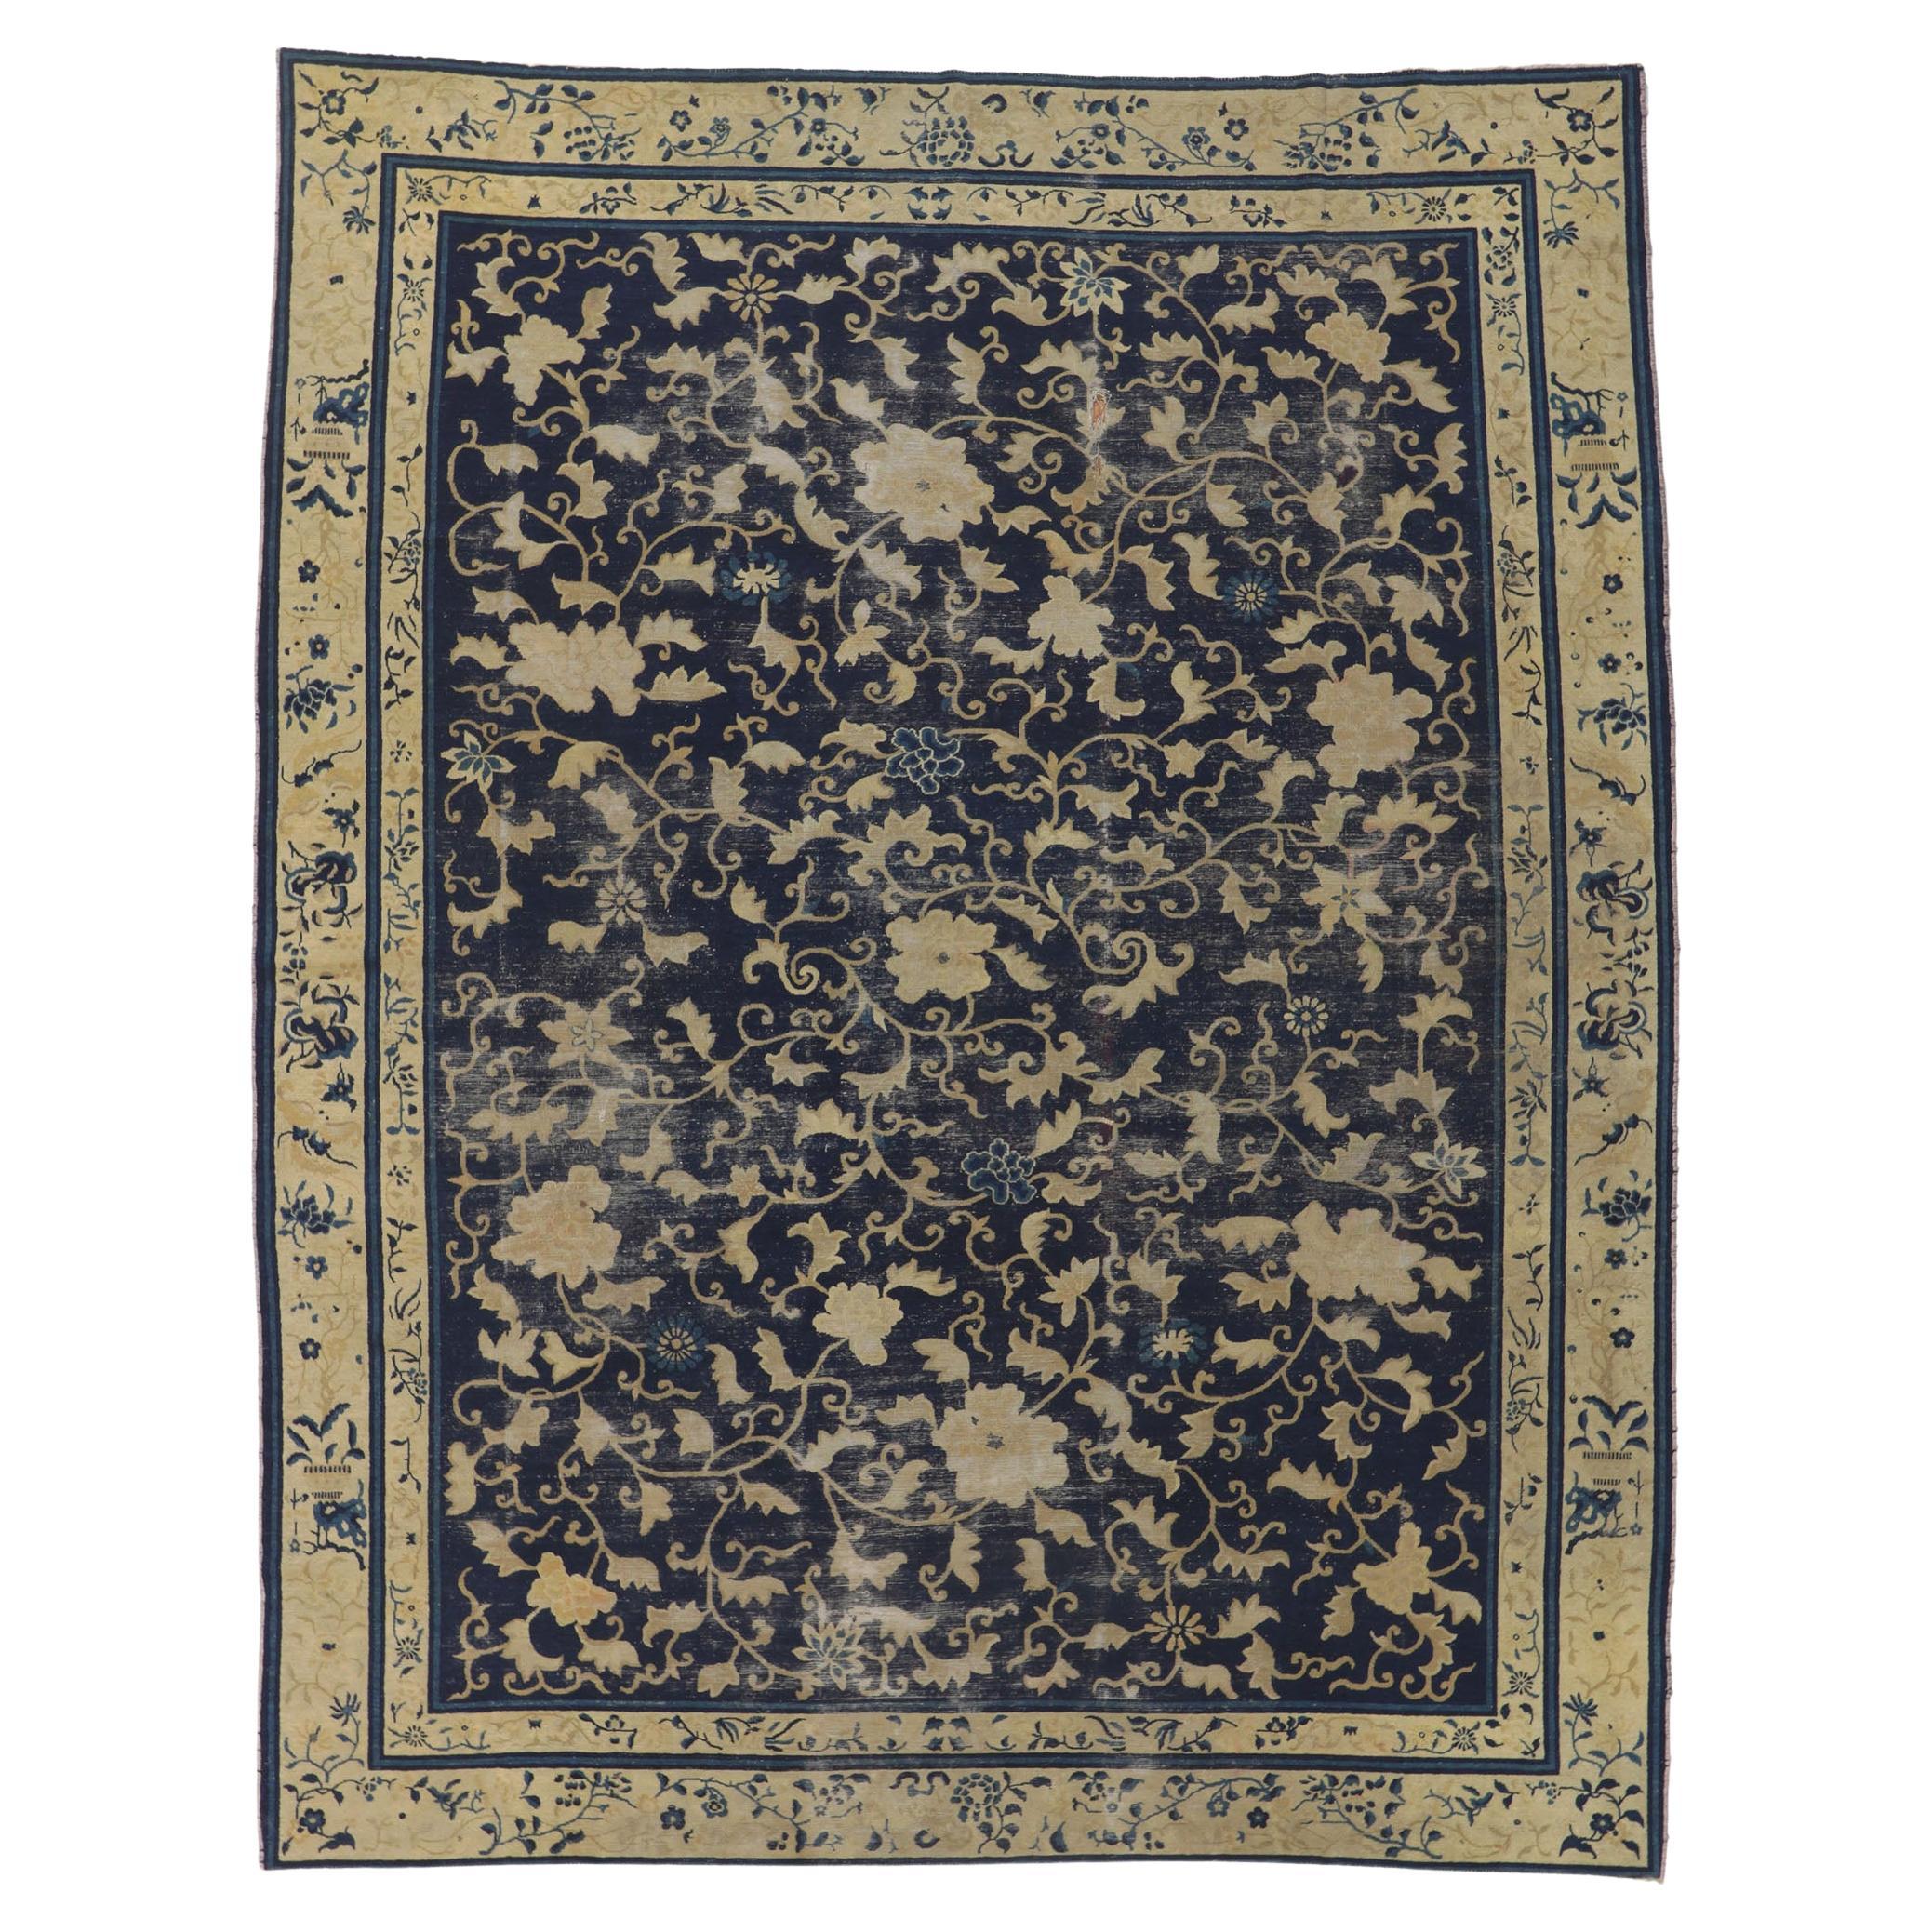 Distressed Antique Chinese Peking Rug with Rustic Chinoiserie Style